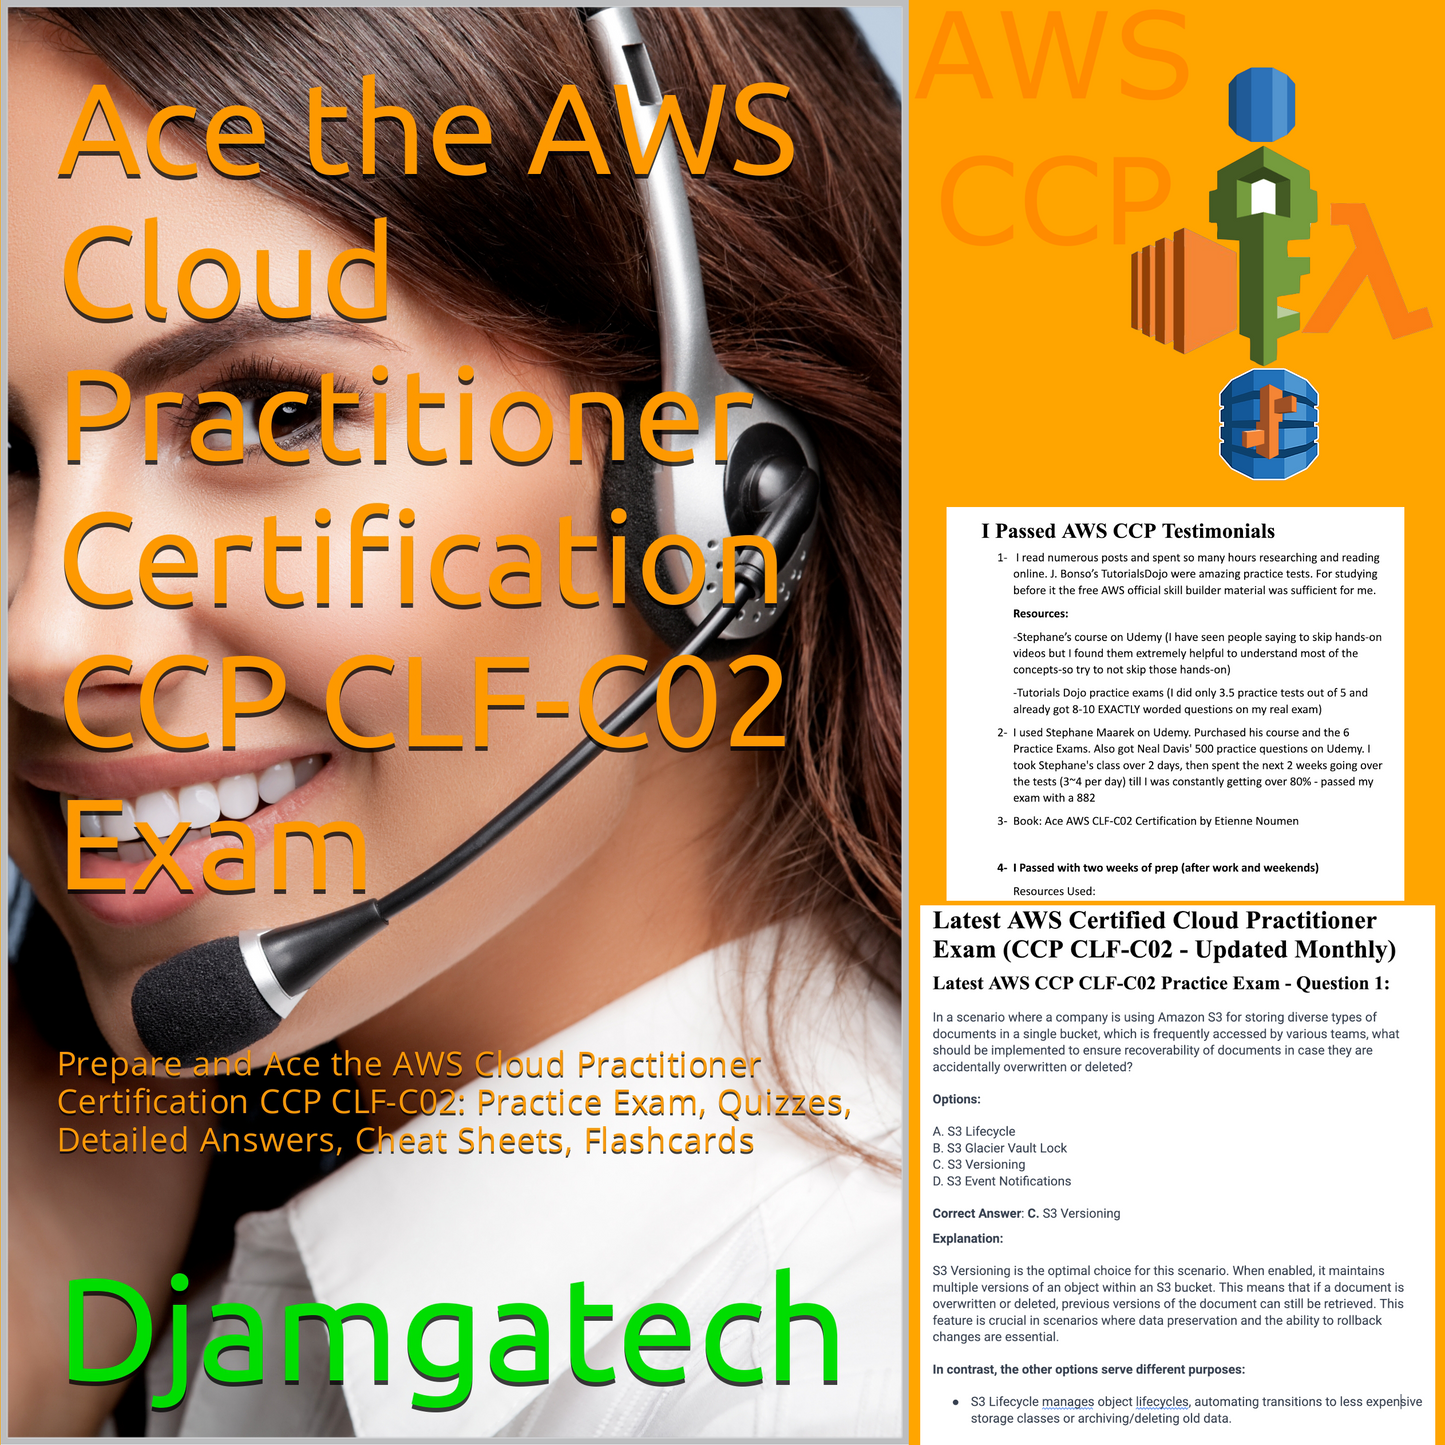 Ace the AWS Cloud Practitioner CCP CLF-C02 Certification Exam - Prepare and Ace the AWS Cloud Practitioner Certification CCP CLF-C02: Practice Exam, Quizzes, Detailed Answers, Cheat Sheets, Flashcards